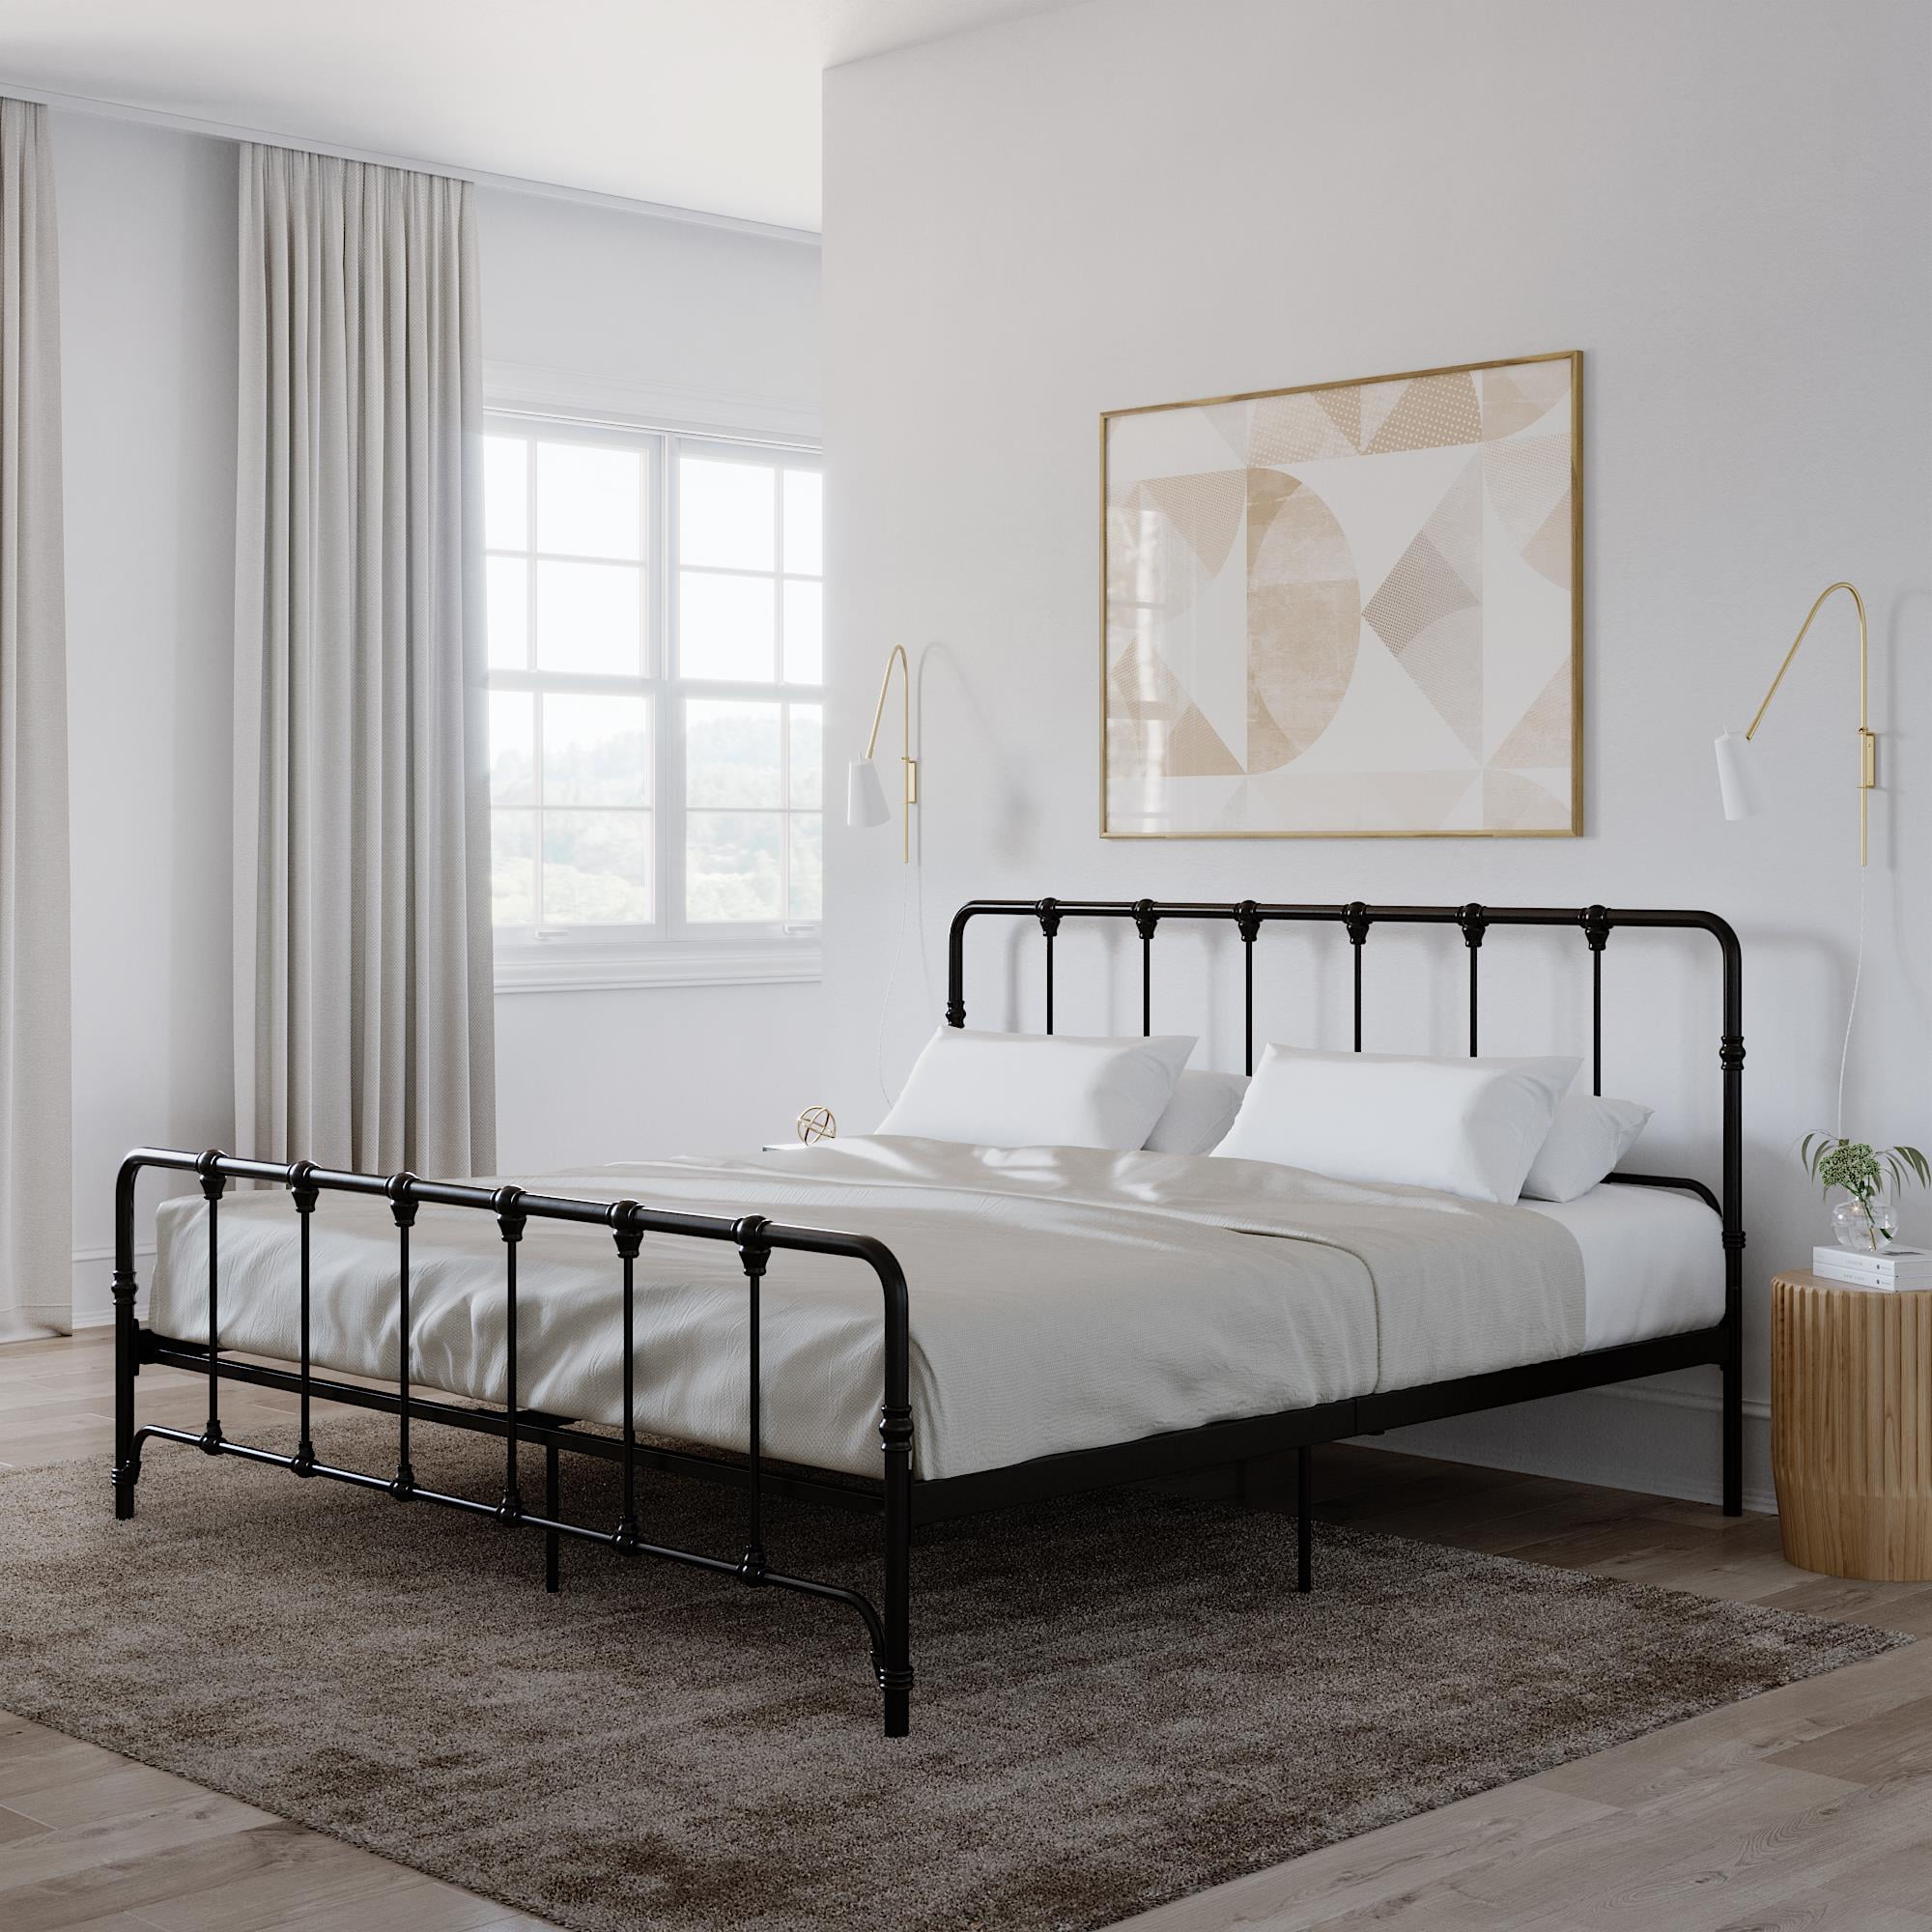 Mainstays Farmhouse Metal Bed King, All In One King Size Bed